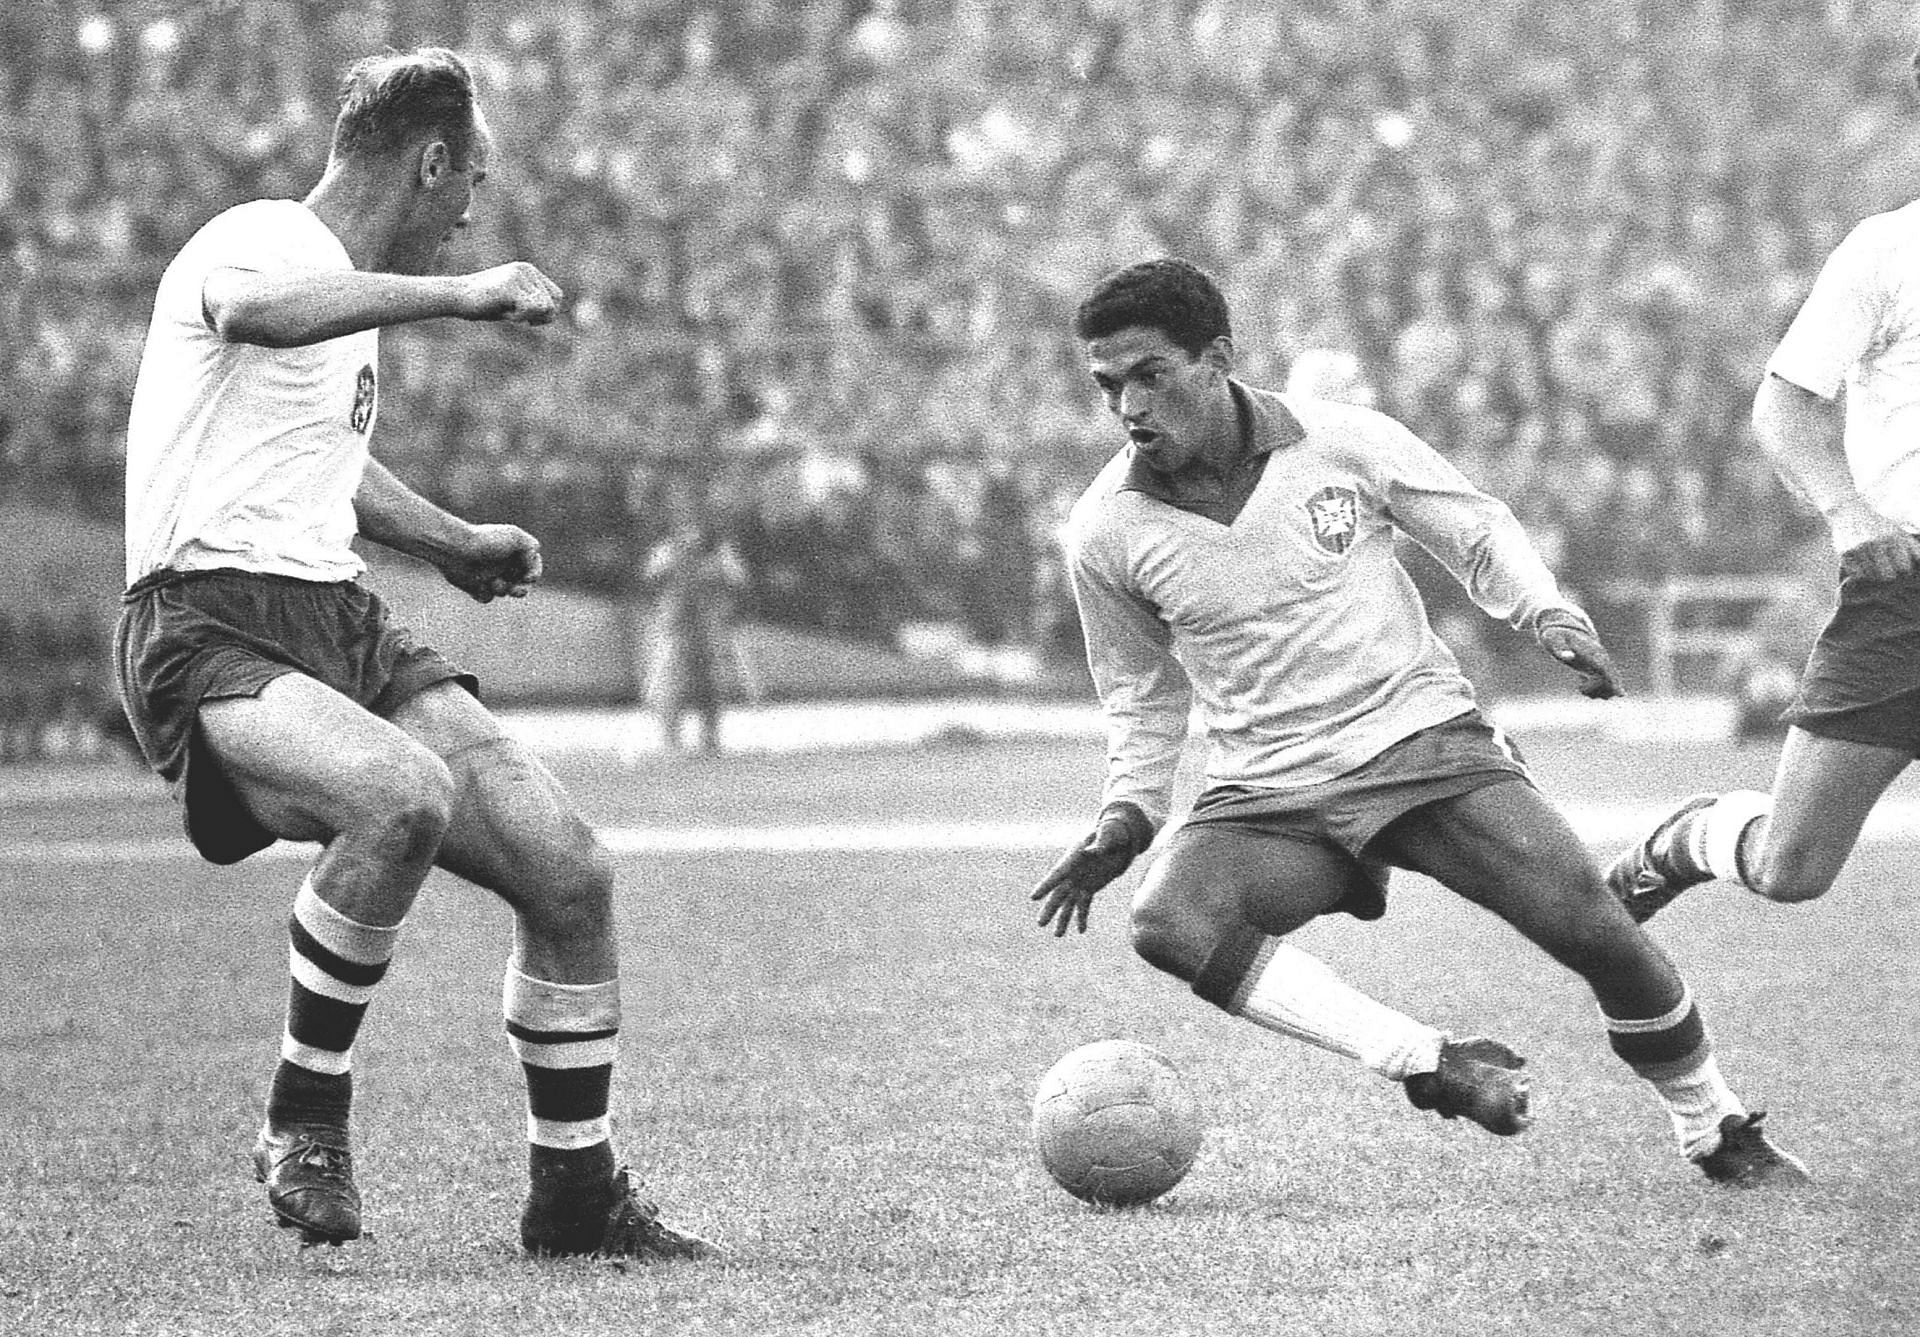 Garrincha zipping past players in 1962 | Courtesy: @FIFAWorldCup